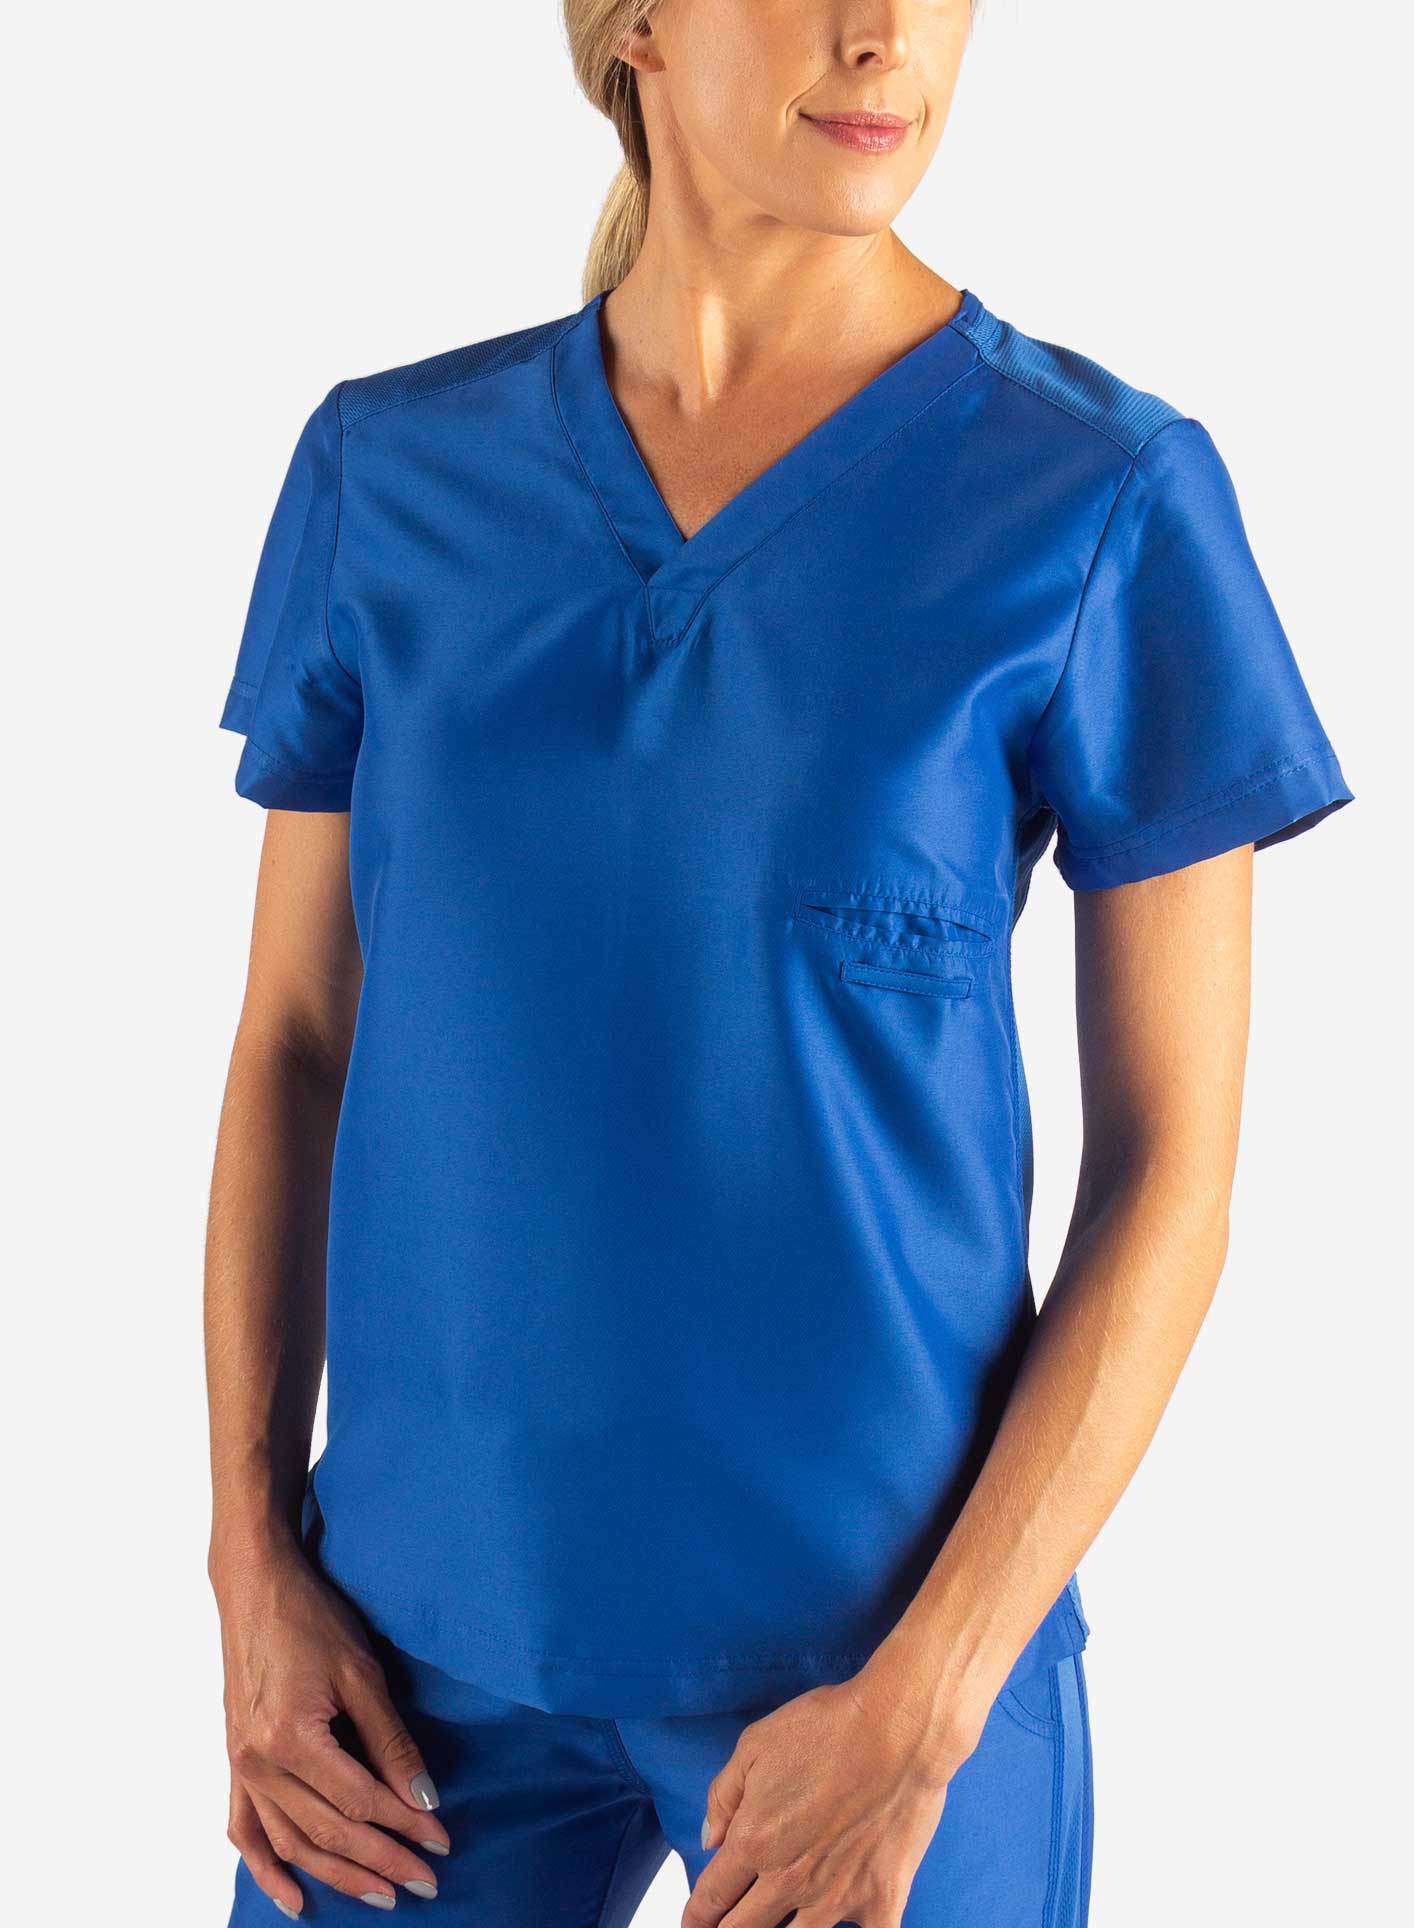 Women's Fitted Scrub Top in royal-blue